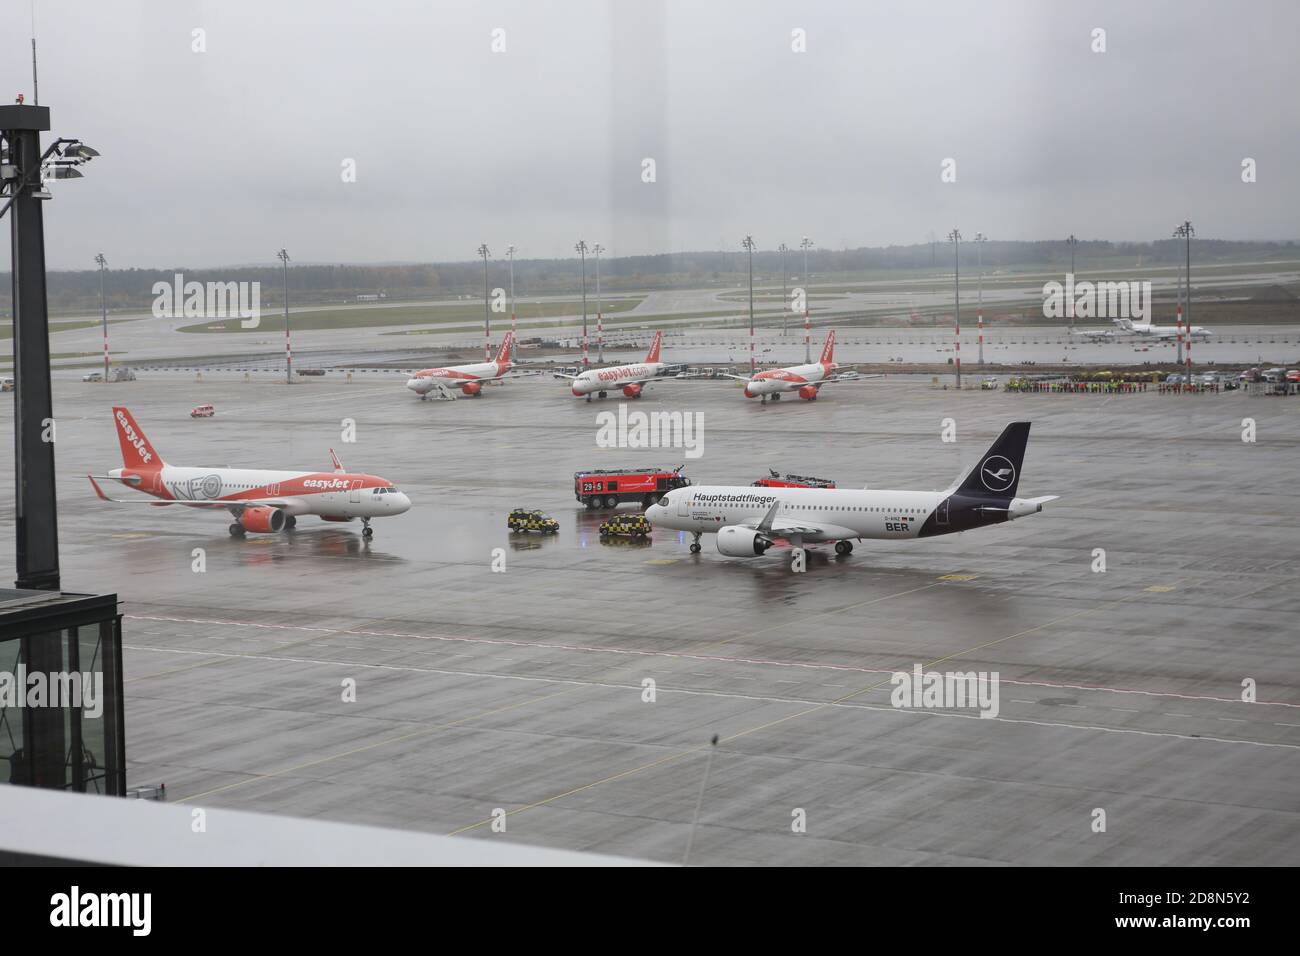 10/31/2020, Schönefeld, Germany, Arrival of the first easyJet and the first Lufthansa flight at the new Berlin Brandenburg Willy Brandt Airport in Schönefeld.. Arrival of the first two flights from easyJet and Lufthansa to the new Berlin Brandenburg Willy Brandt Airport in Schönefeld. on  October 31th. Stock Photo